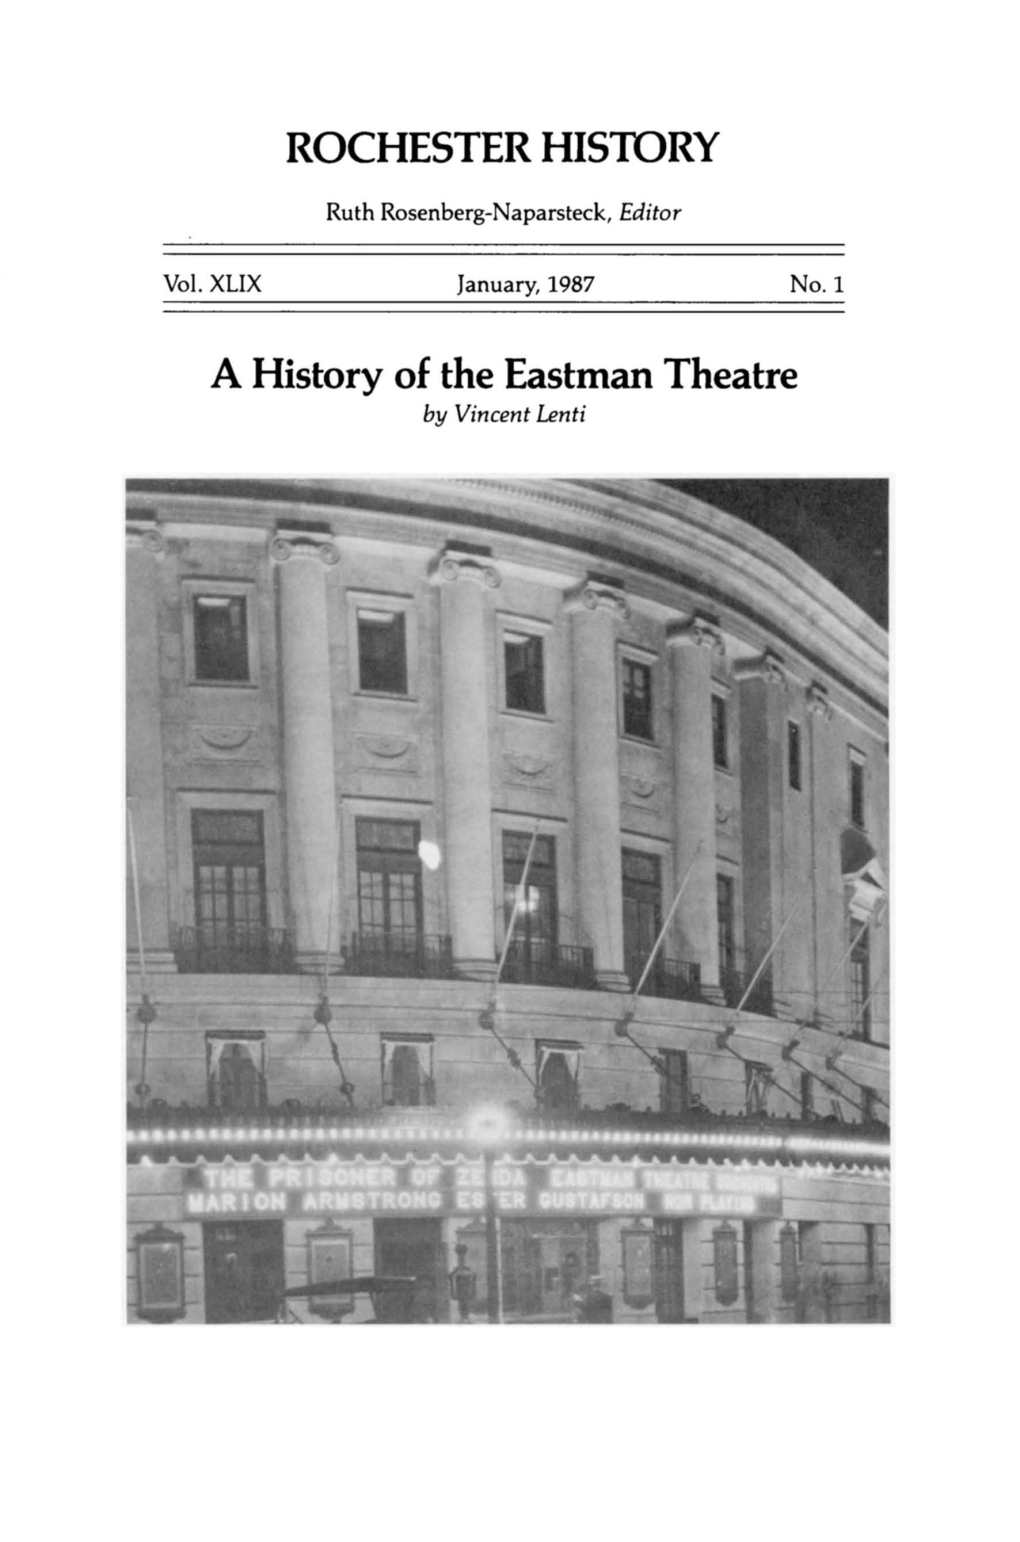 A History of the Eastman Theatre by Vincent Lenti Above: George Eastman (1854-1932)